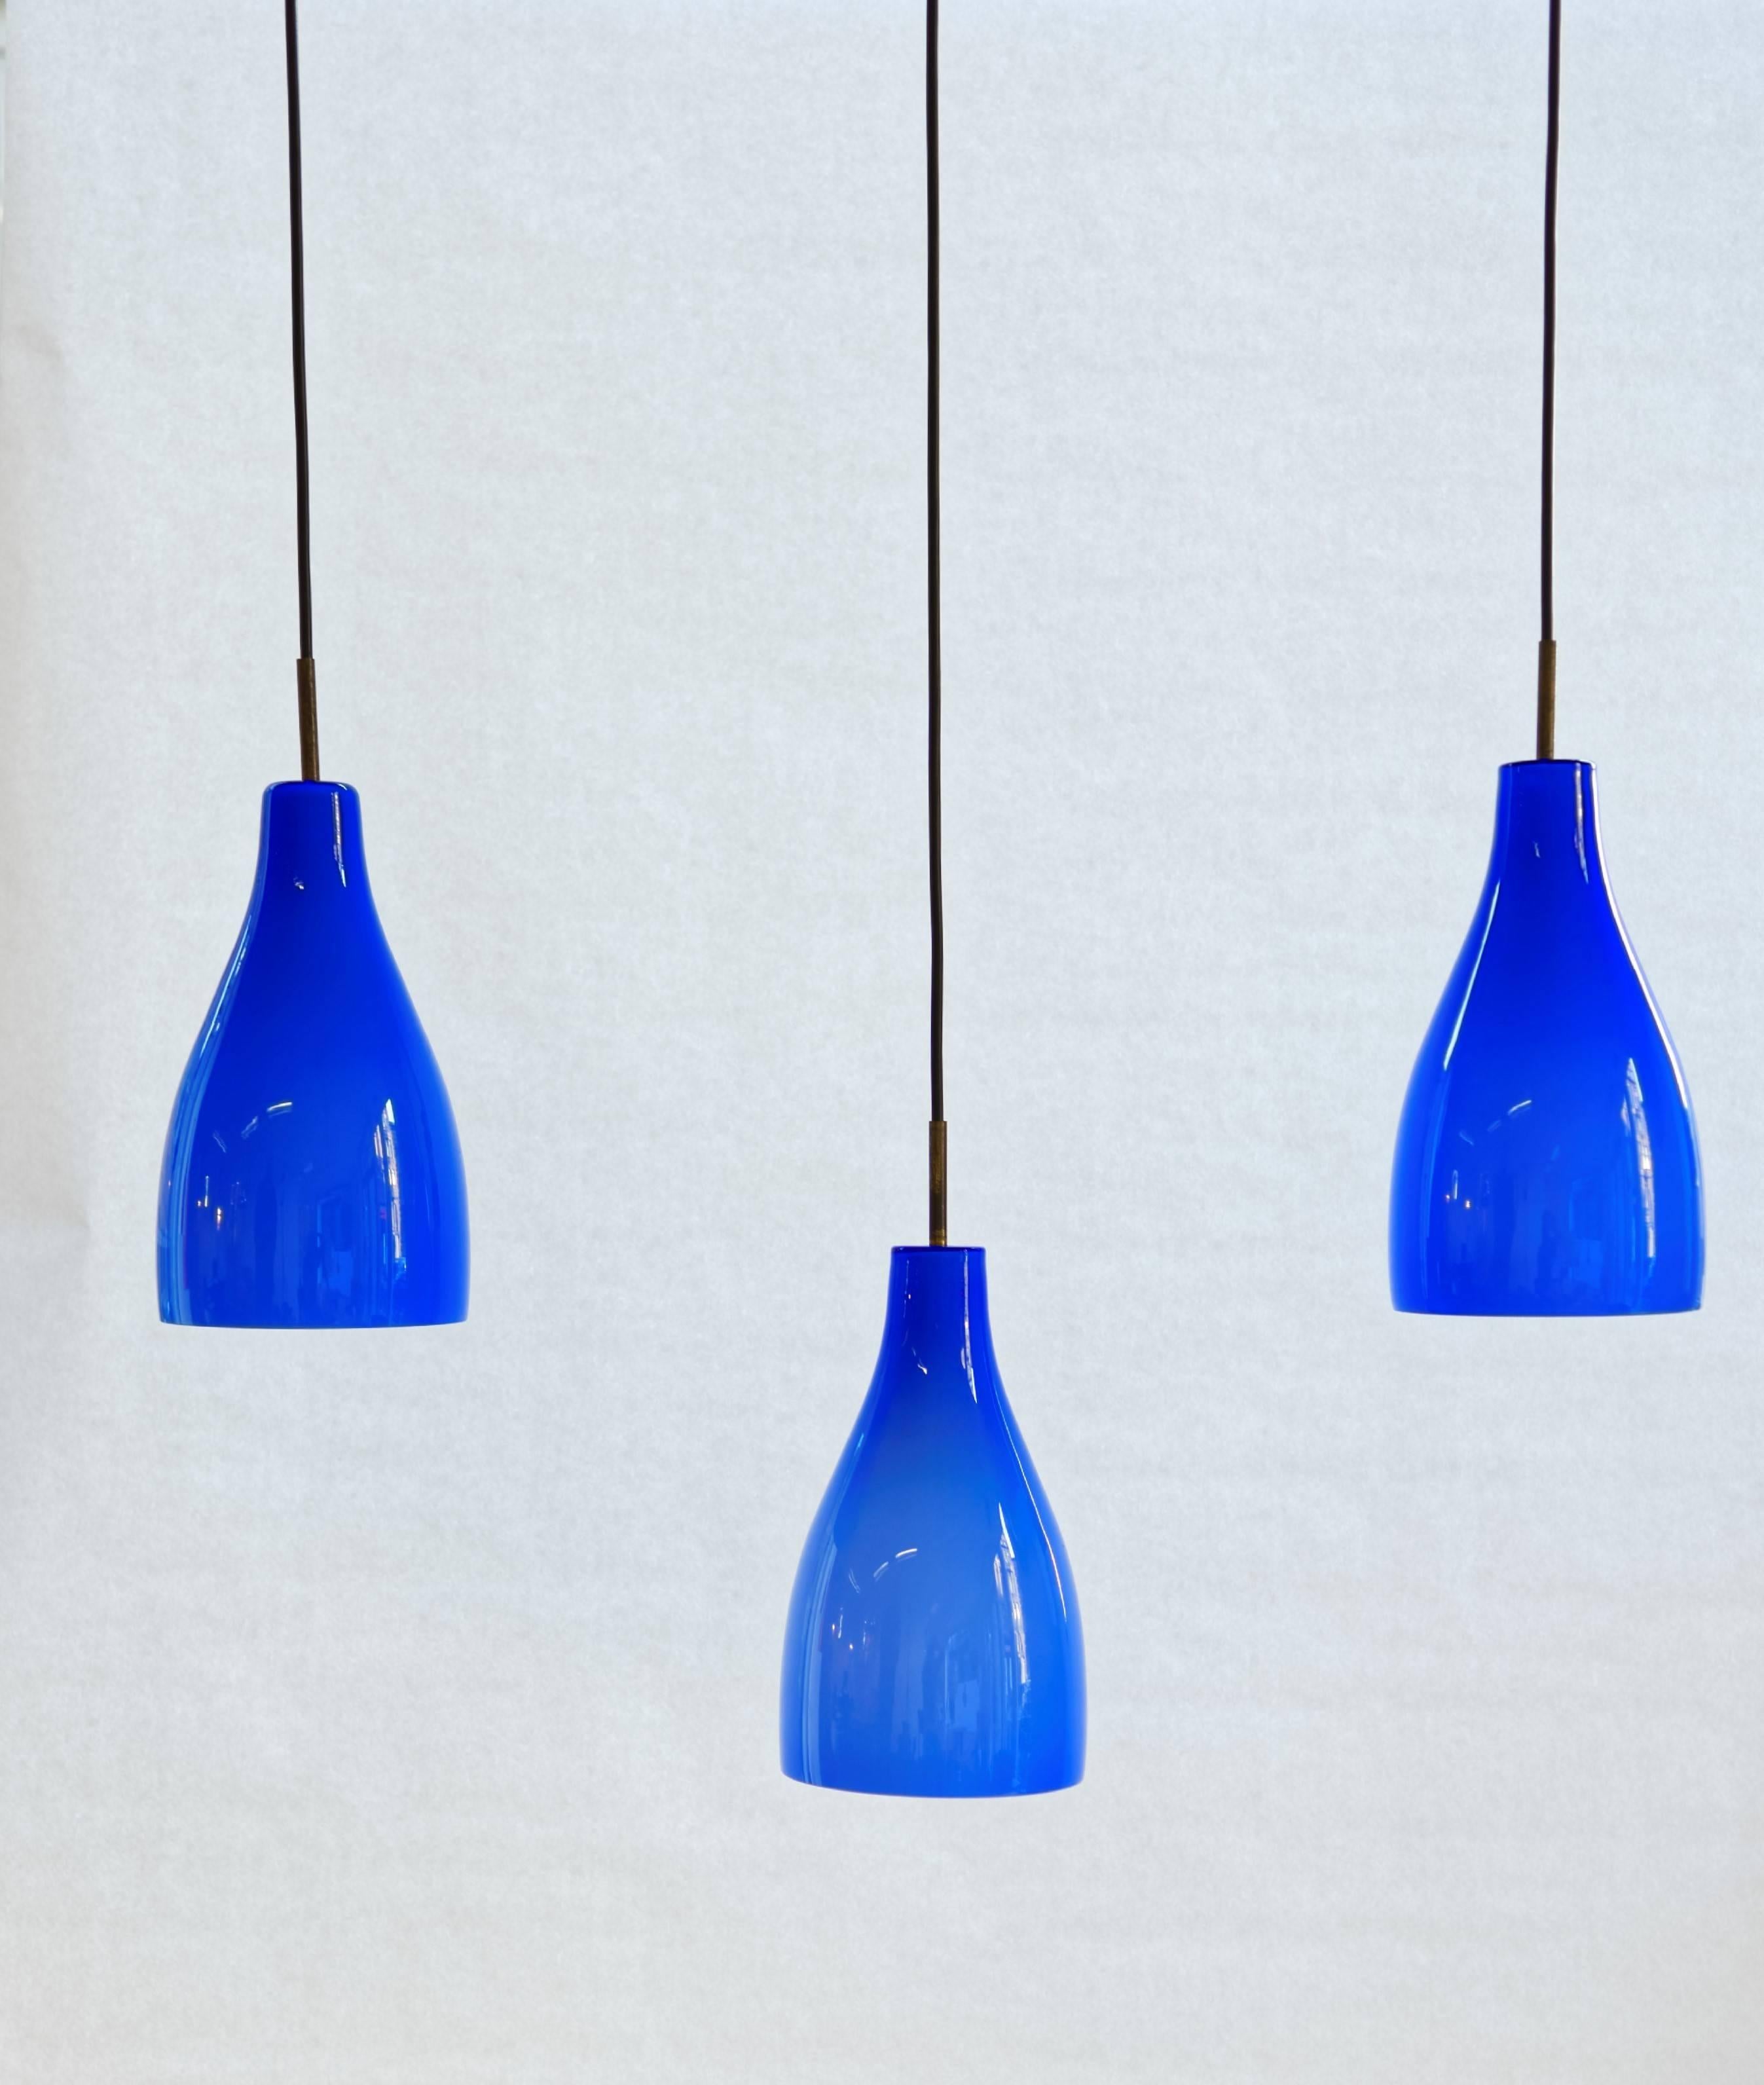 Set of three pendants designed by Massimo Vignelli (1931-2014) and executed by Venini, glassworks in Murano, Italy.
Transparent royal blue glass on an inner white opaque glass. Brass frame. One light bulb by lamp.